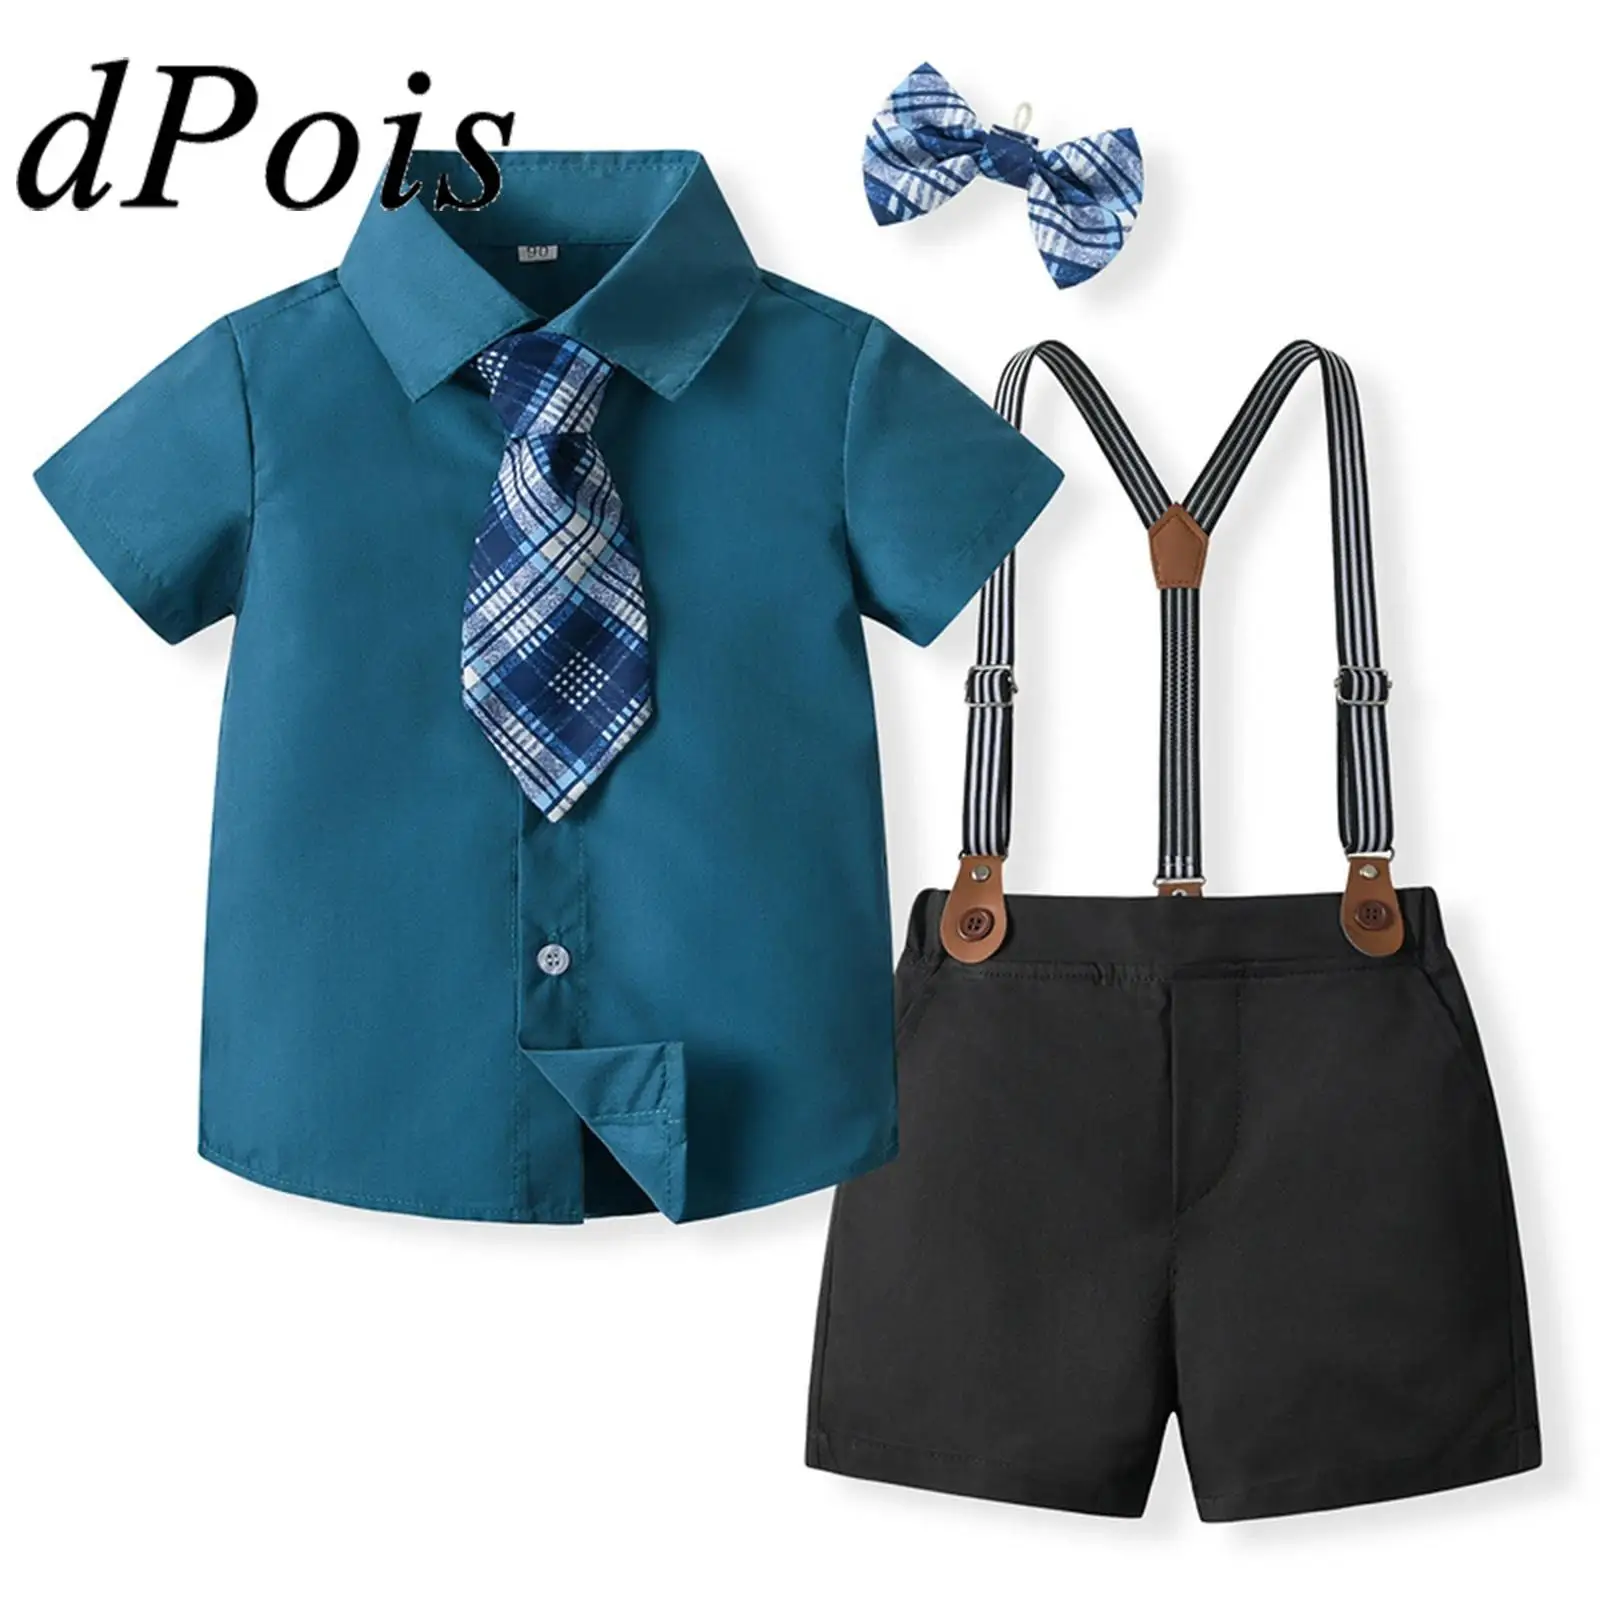 

Kids Boys British Style Formal Suit Gentleman Outfit Short Sleeve Suspenders Shorts for Birthday Party School Uniforms